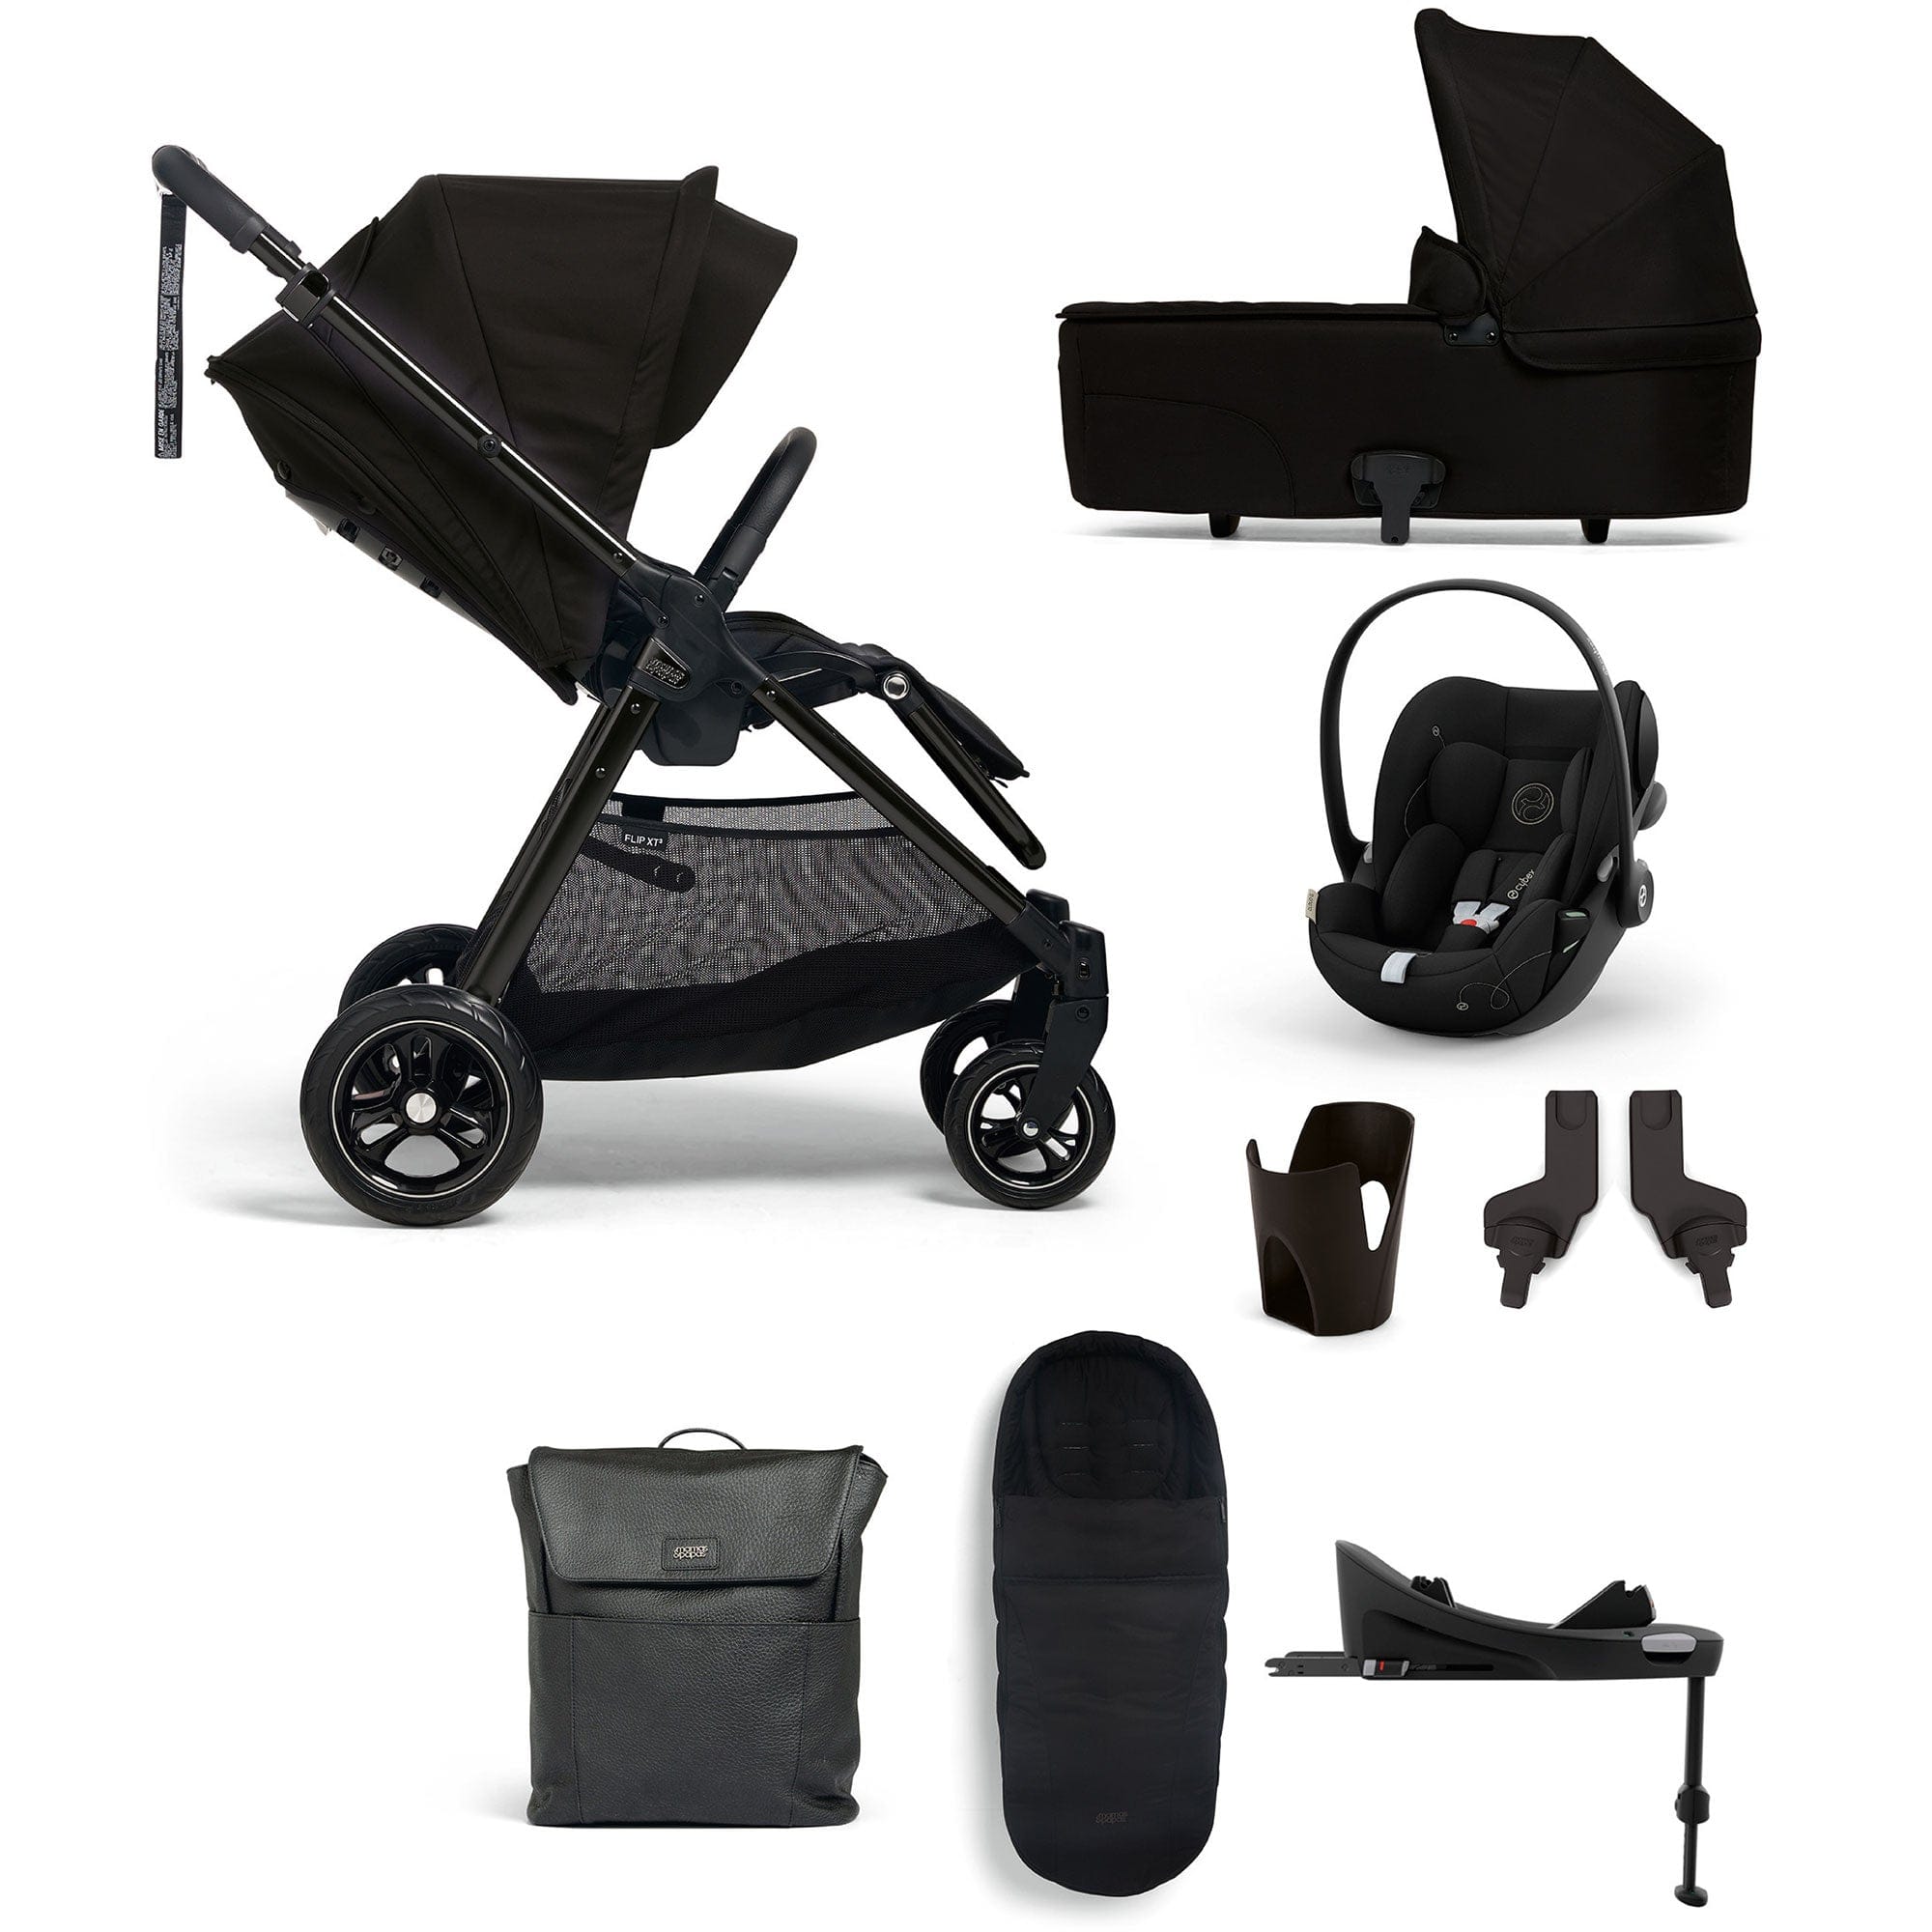 Mamas & Papas Flip XT³ 8 Piece Essentials Bundle with Car Seat in Ink Travel Systems 61951NK00 5063229087356